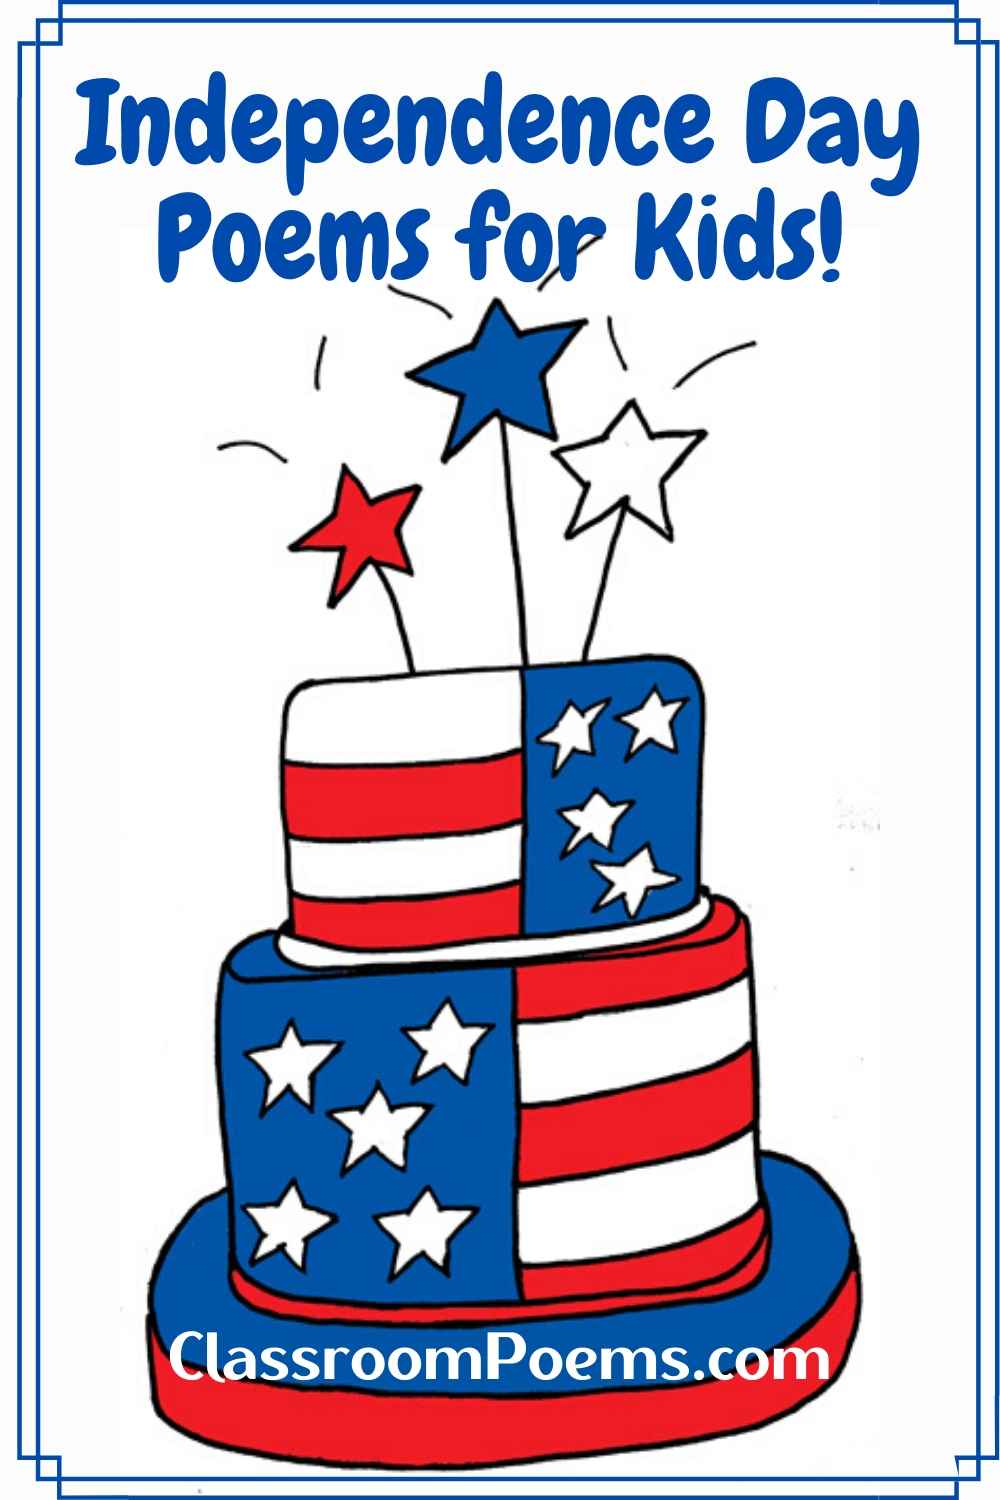 Independence Day poems for kids about the USA 4th of July celebrations!